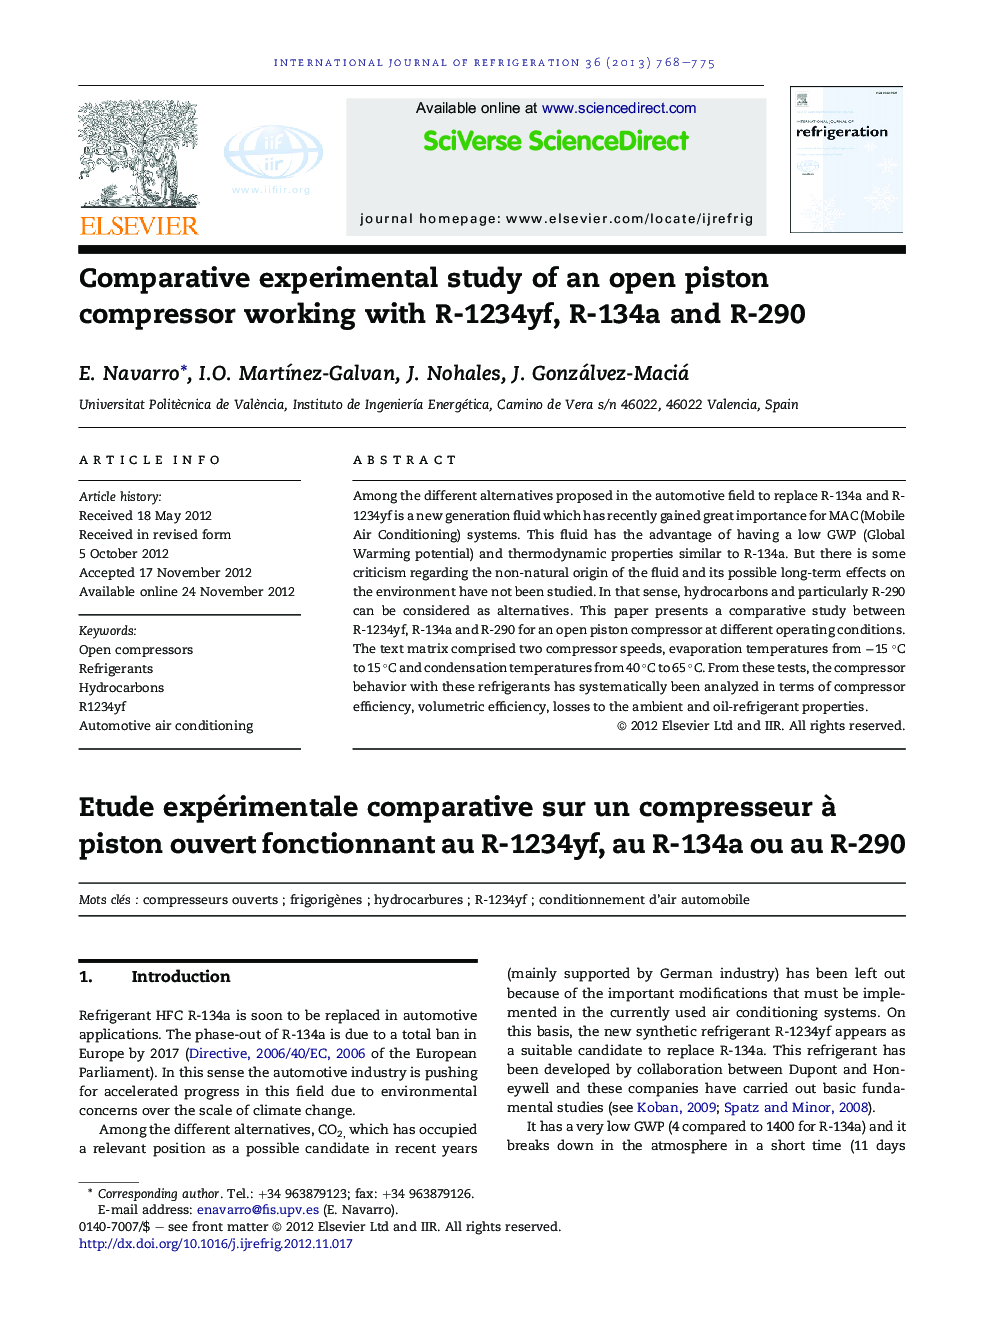 Comparative experimental study of an open piston compressor working with R-1234yf, R-134a and R-290